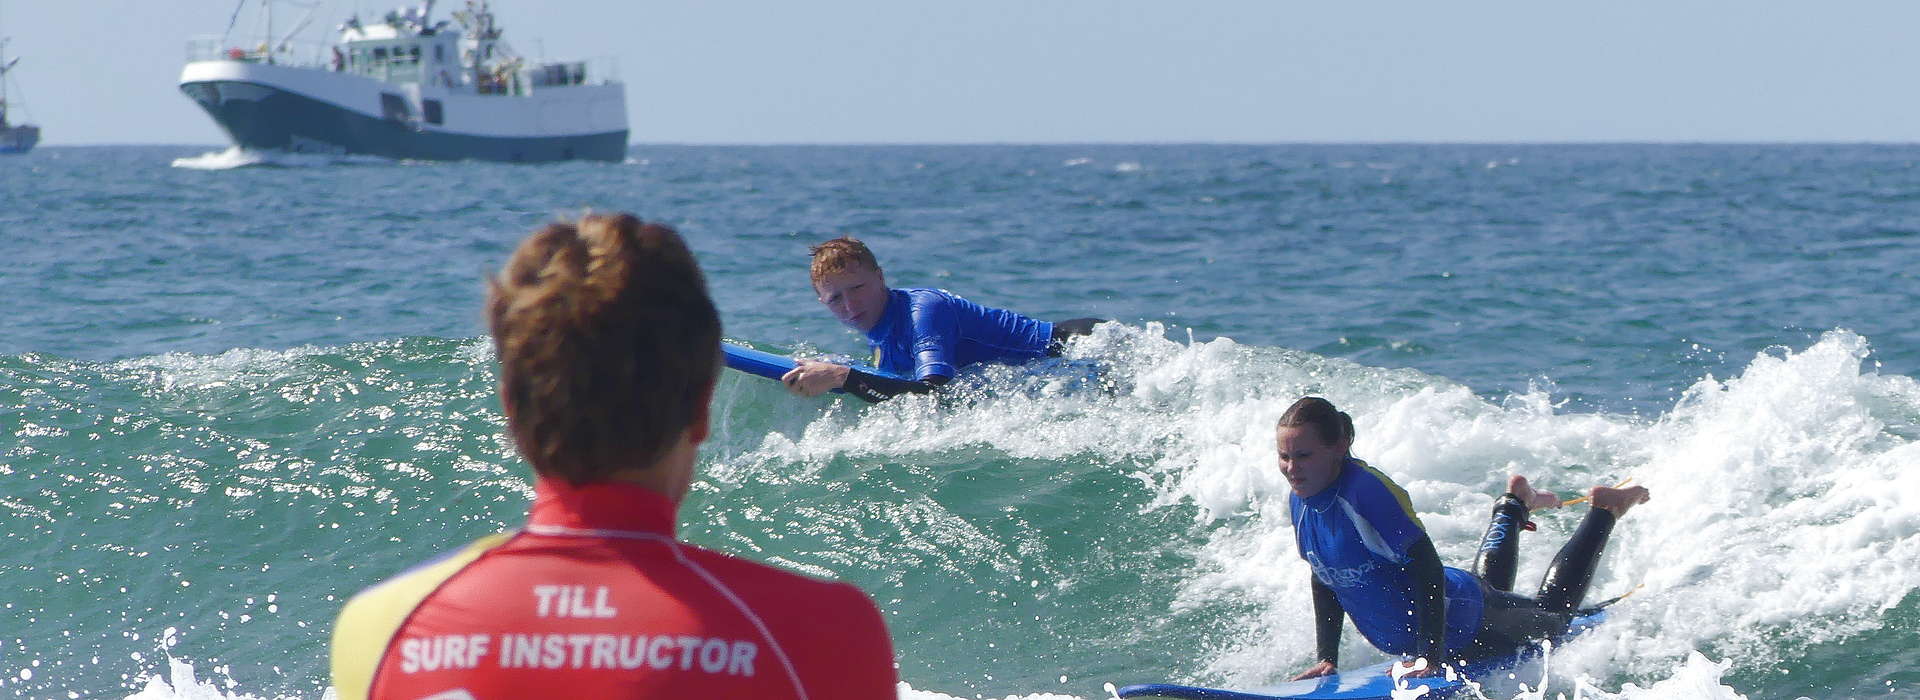 surf course practice in Spain